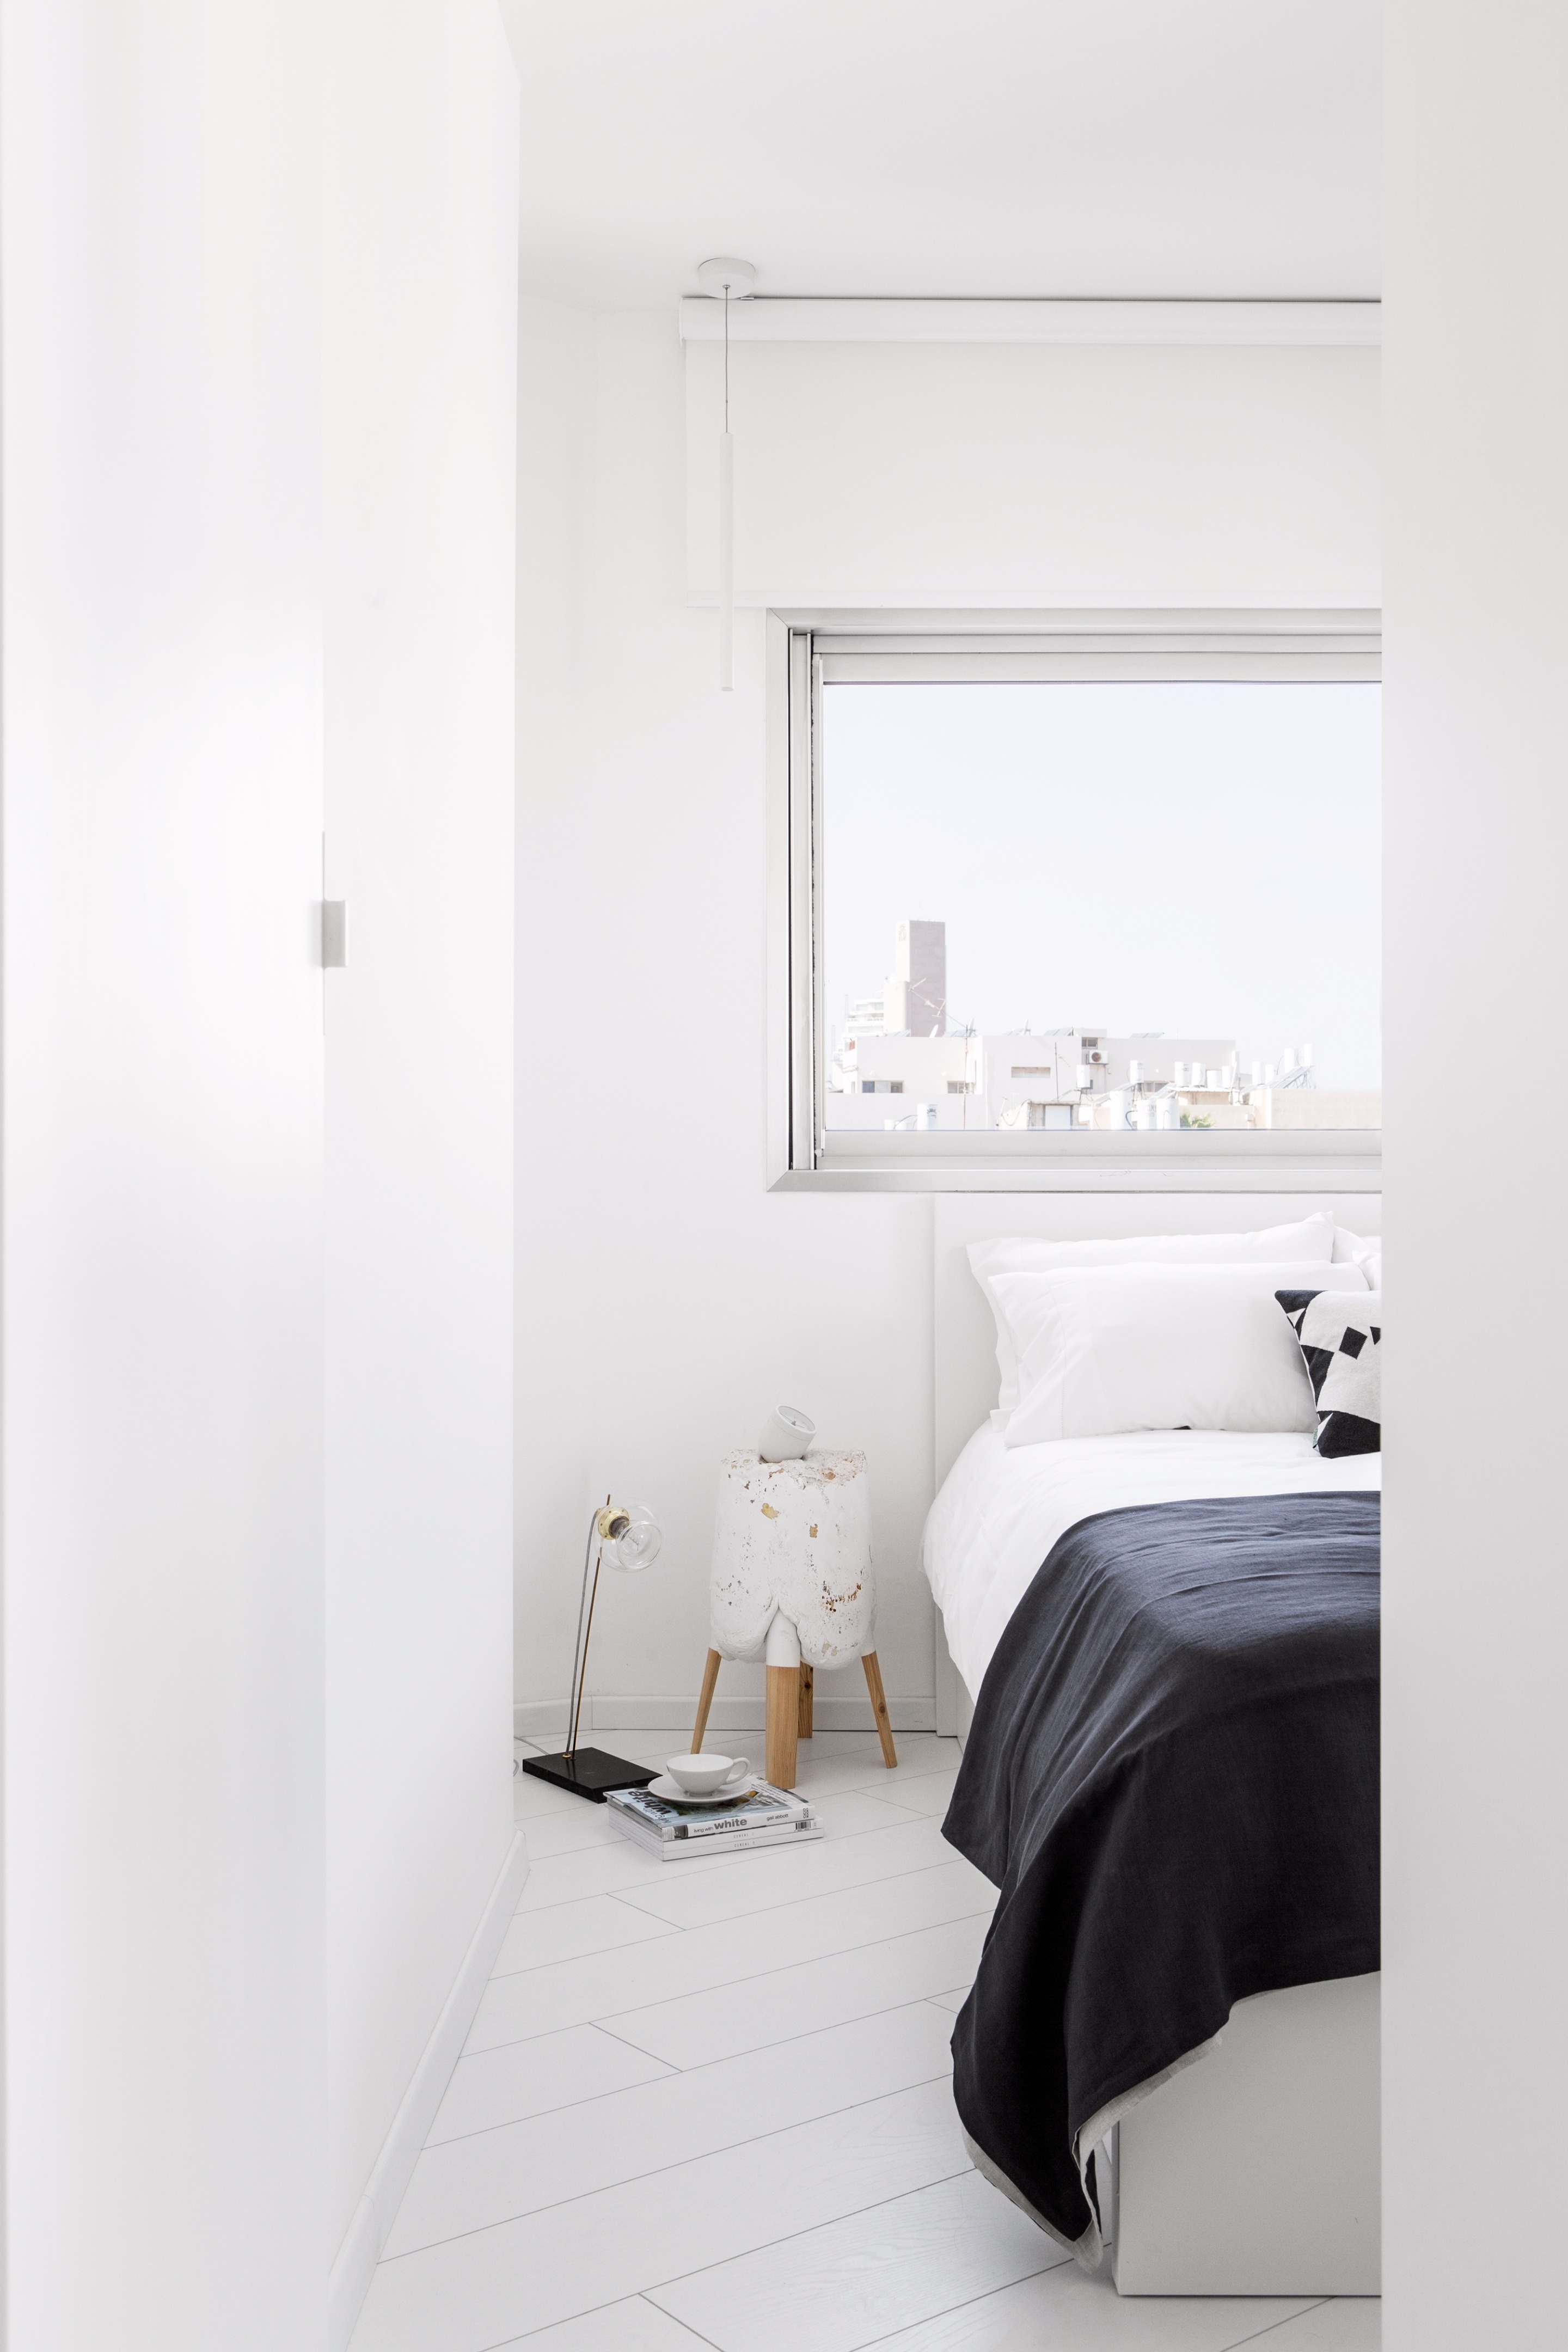 The White Apartment in Tel Aviv, Israel by Yael Perry